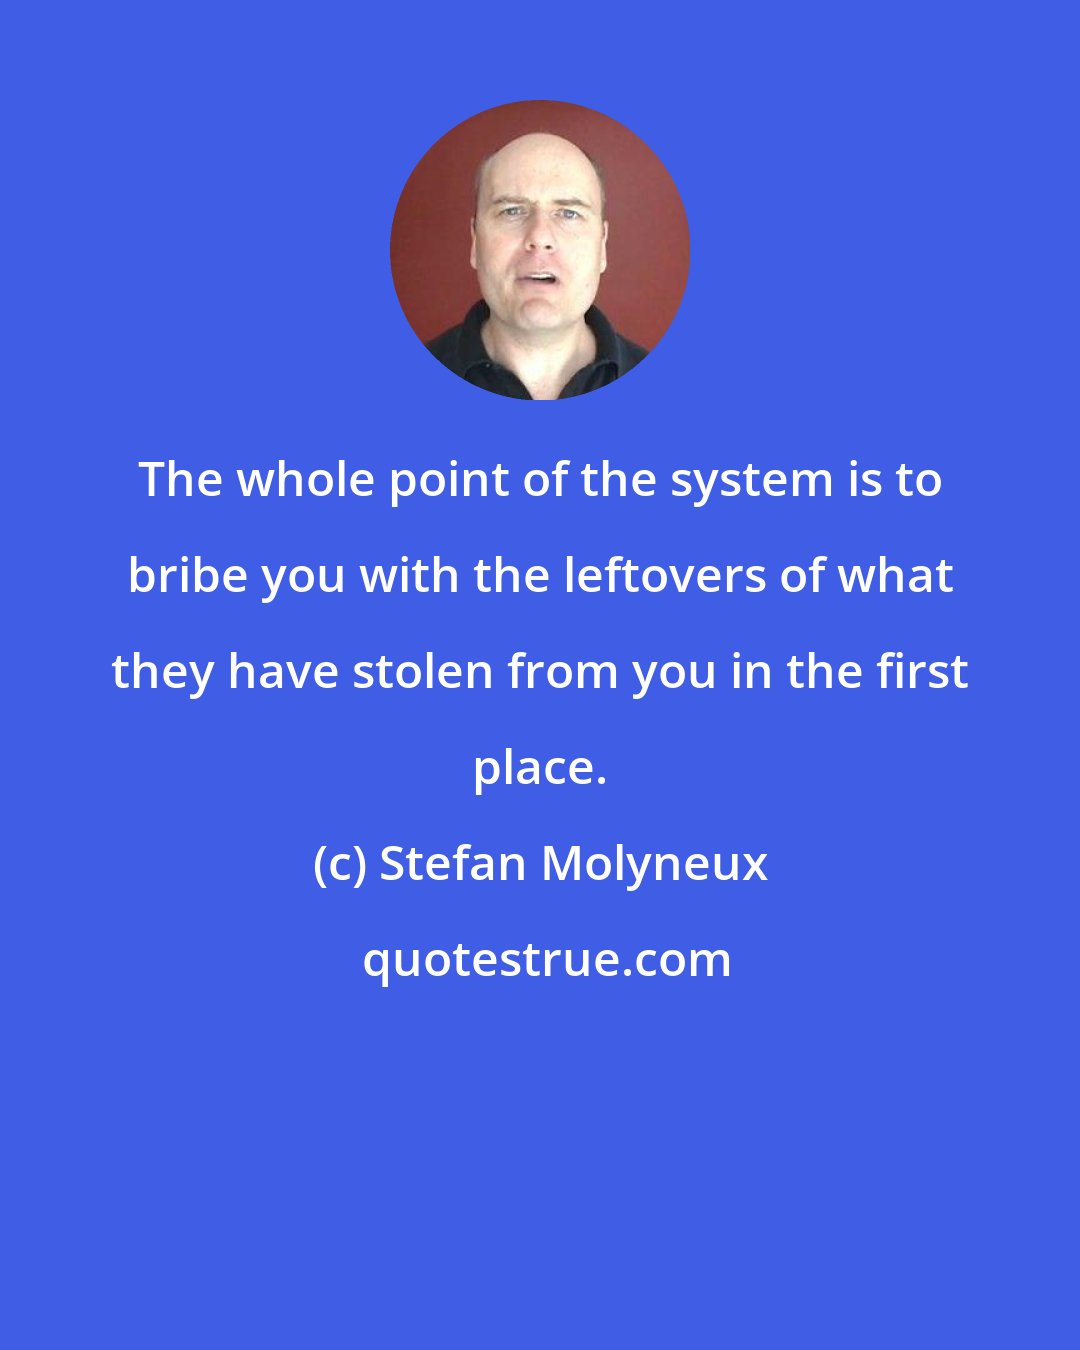 Stefan Molyneux: The whole point of the system is to bribe you with the leftovers of what they have stolen from you in the first place.